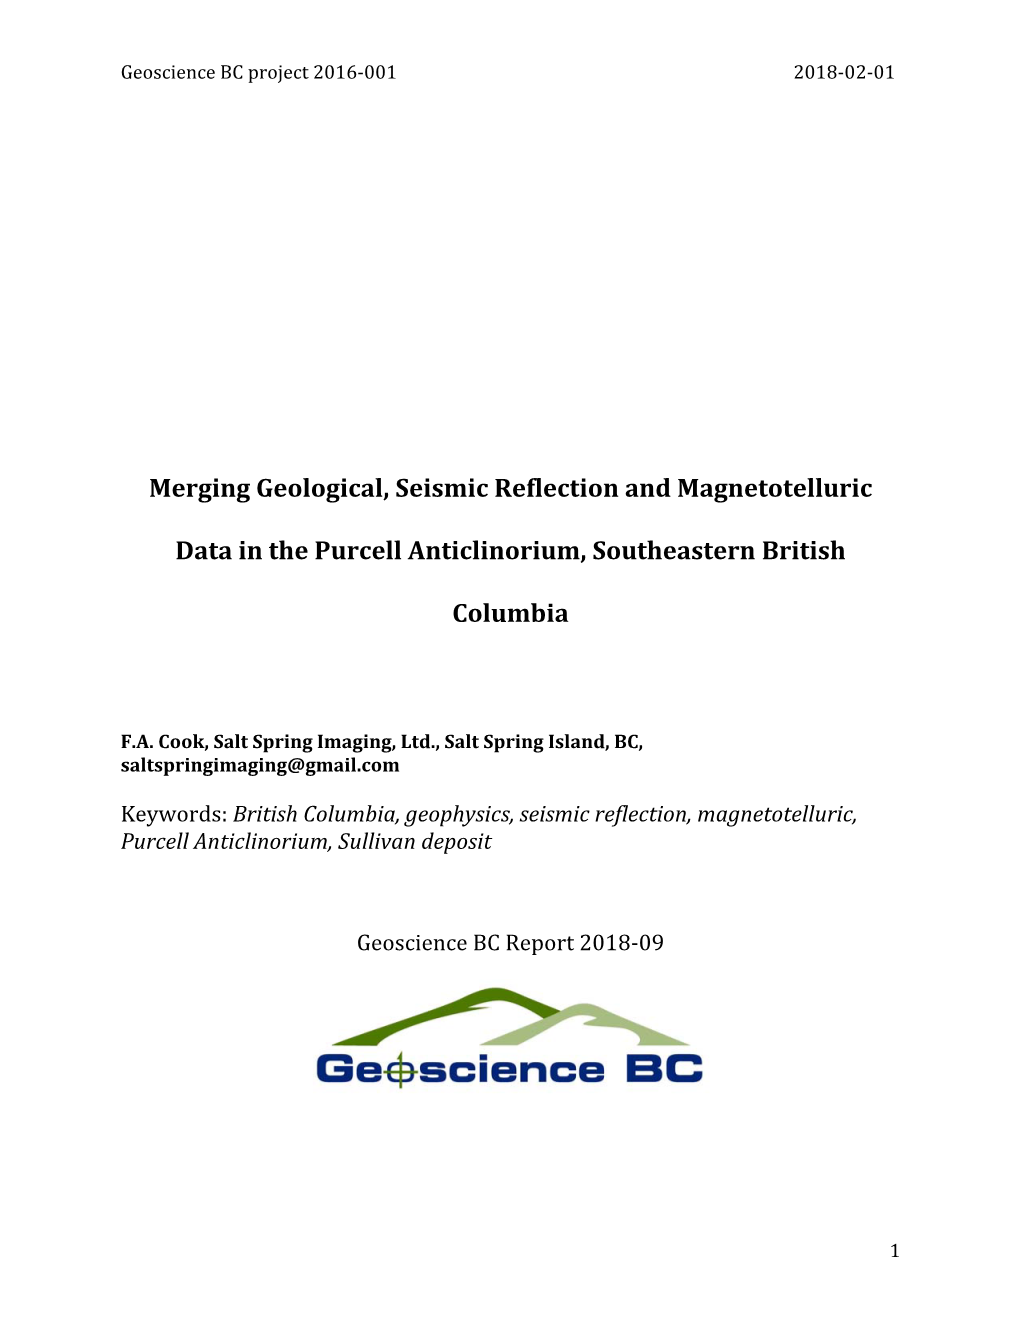 Merging Geological, Seismic Reflection and Magnetotelluric Data